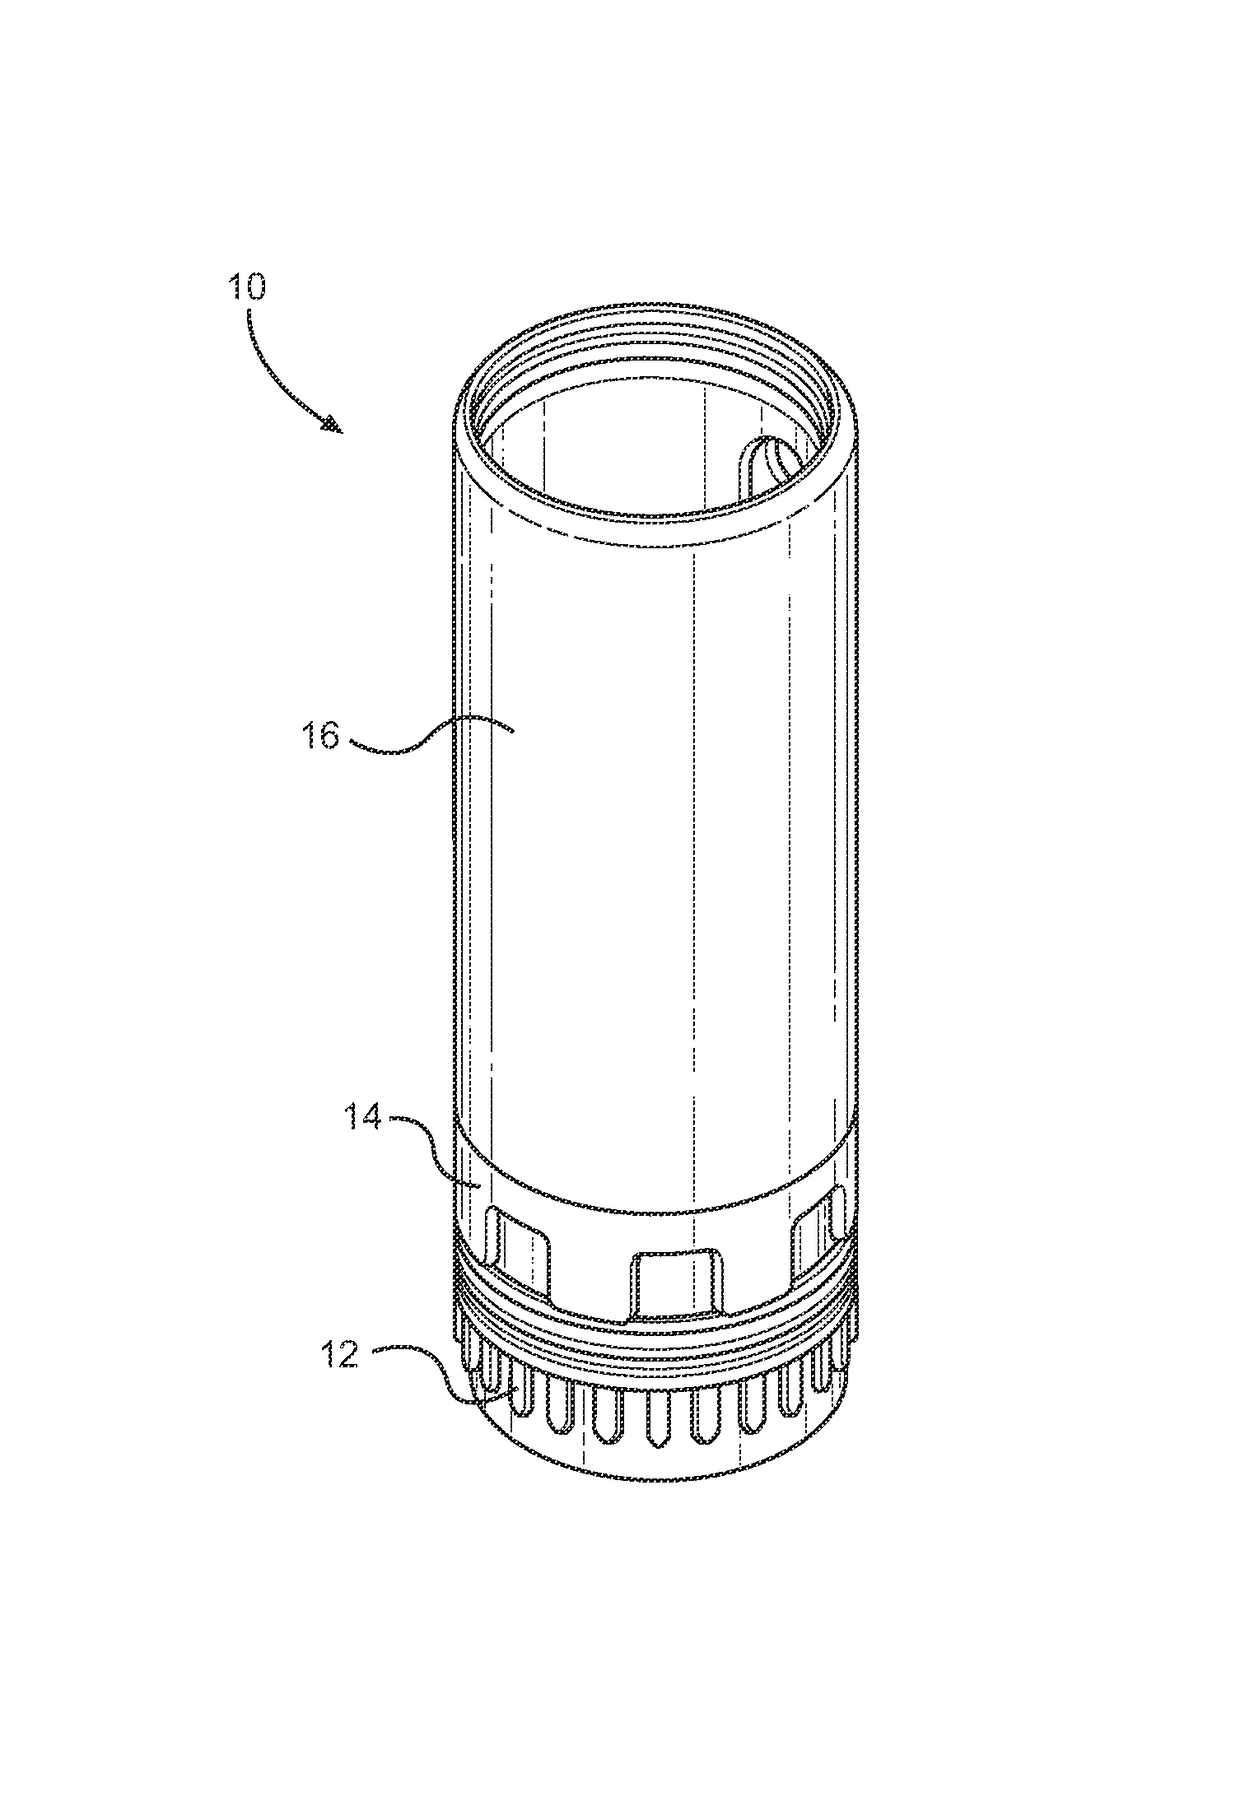 Cosmetic dispenser with crenelated wall for frictional resistance